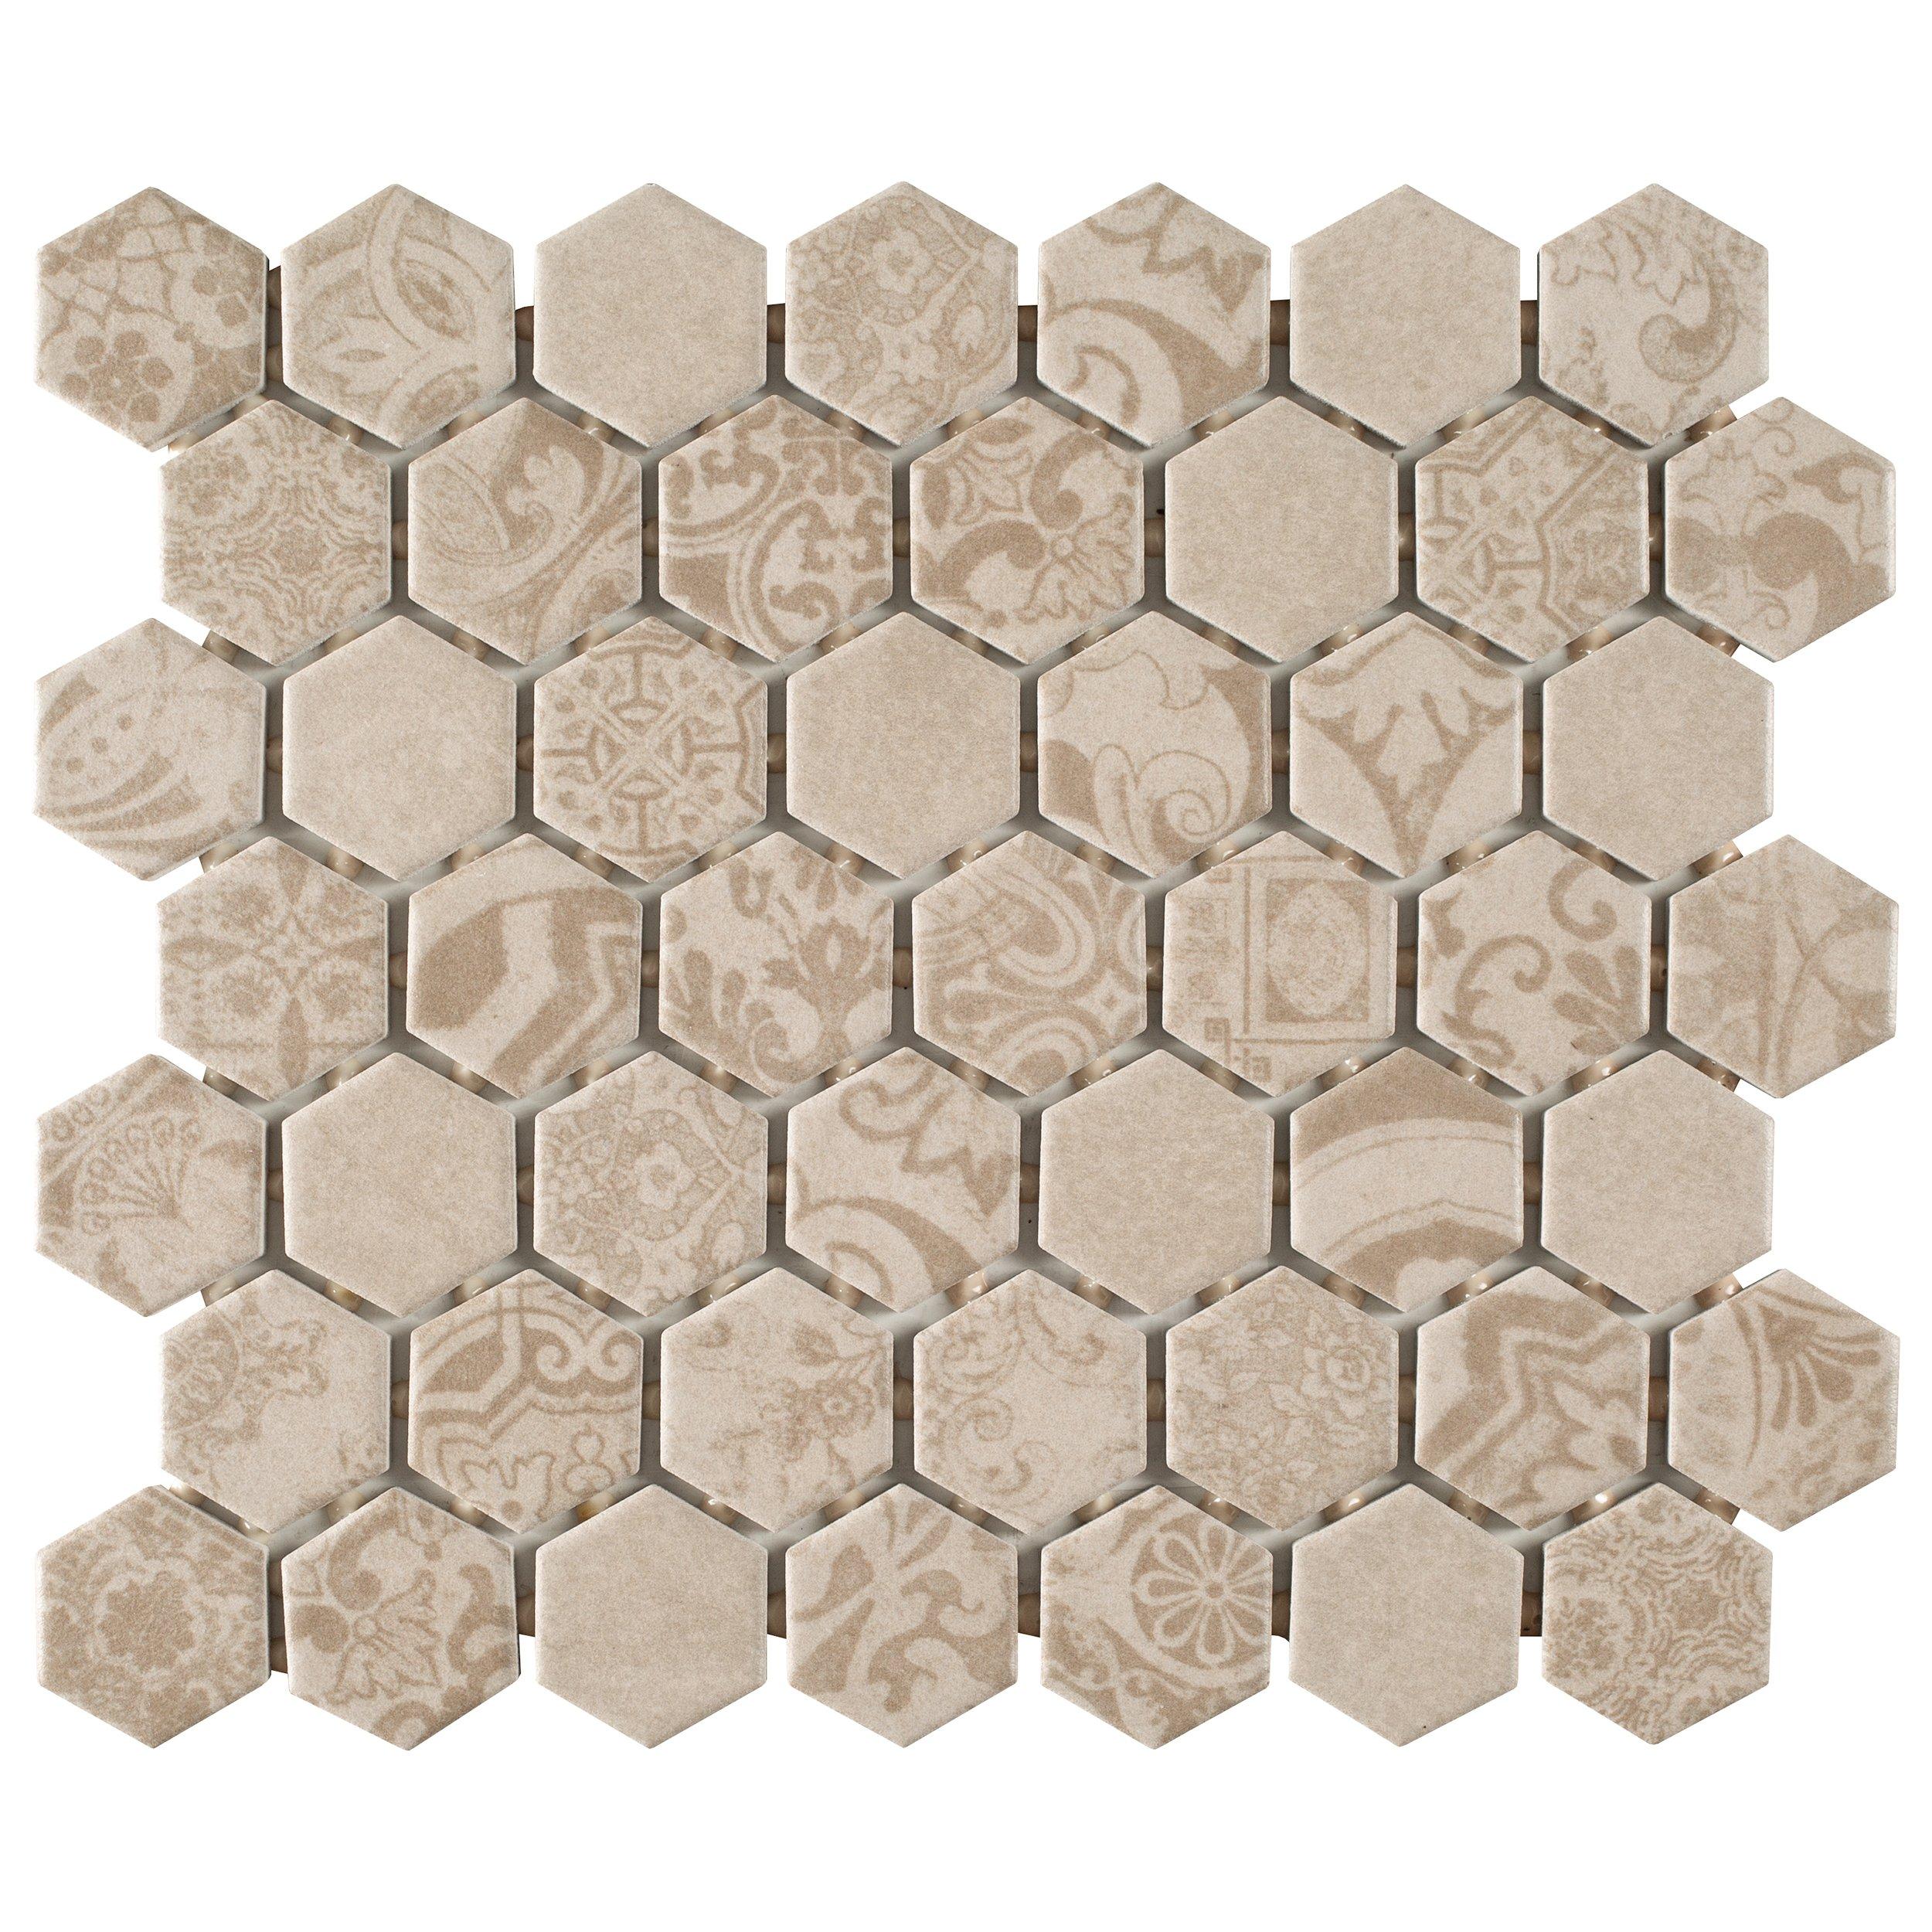 Special Delivery: Nearly 4,500 Pieces in Hexagonal End Grain Floor